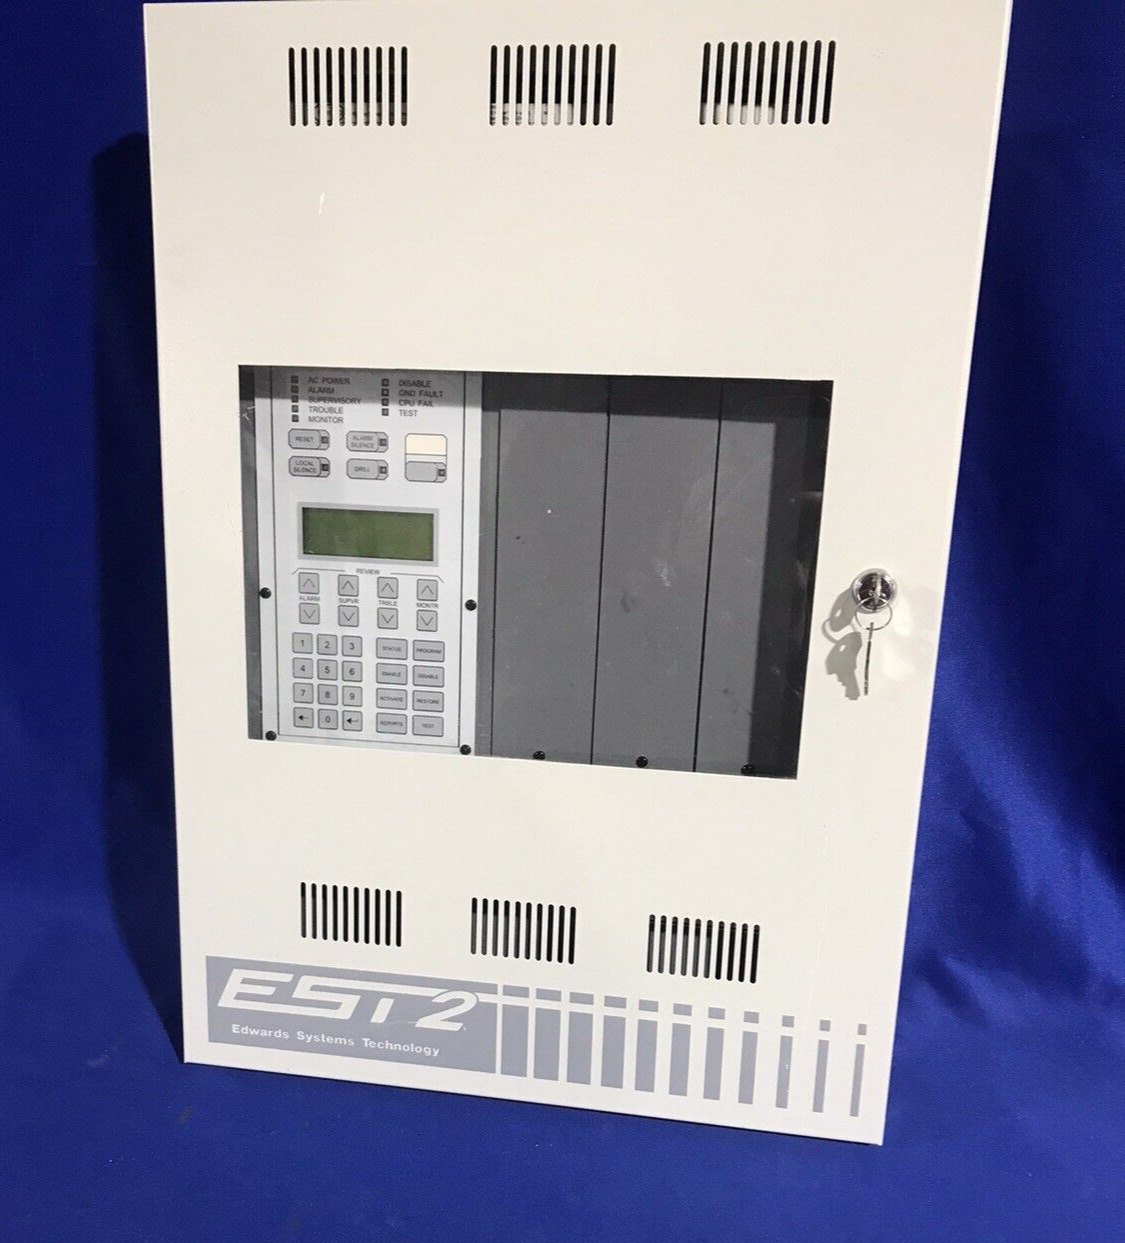 Edwards System Technology EST2 Fire Alarm w/ Display, Power Board, 2-LCX *PARTS*